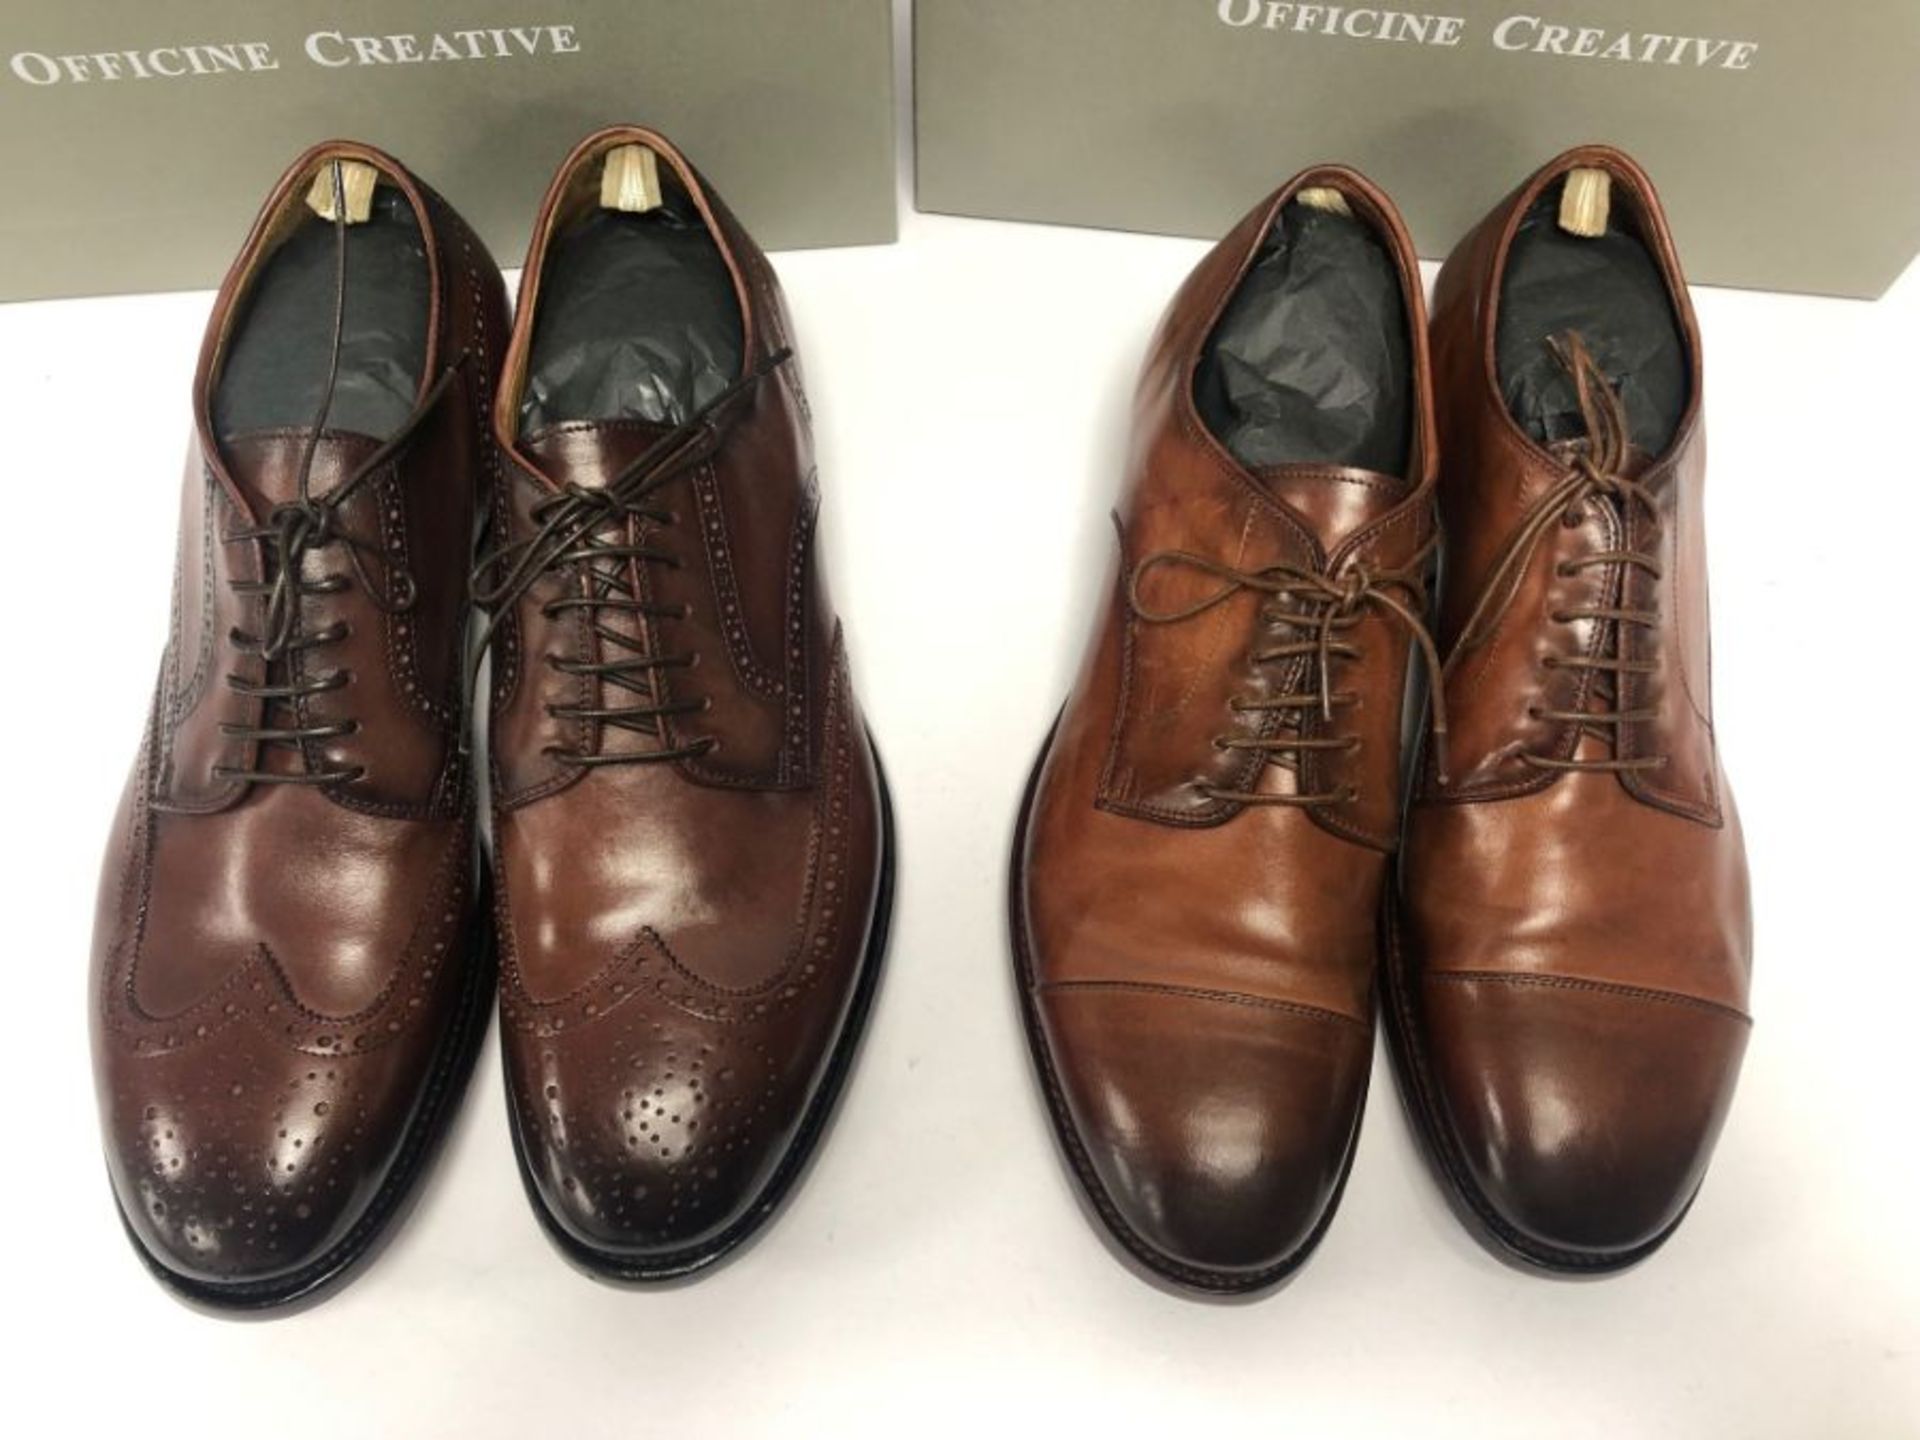 Two pairs of Officine Creative leather loafers, UK 11 - Image 5 of 6